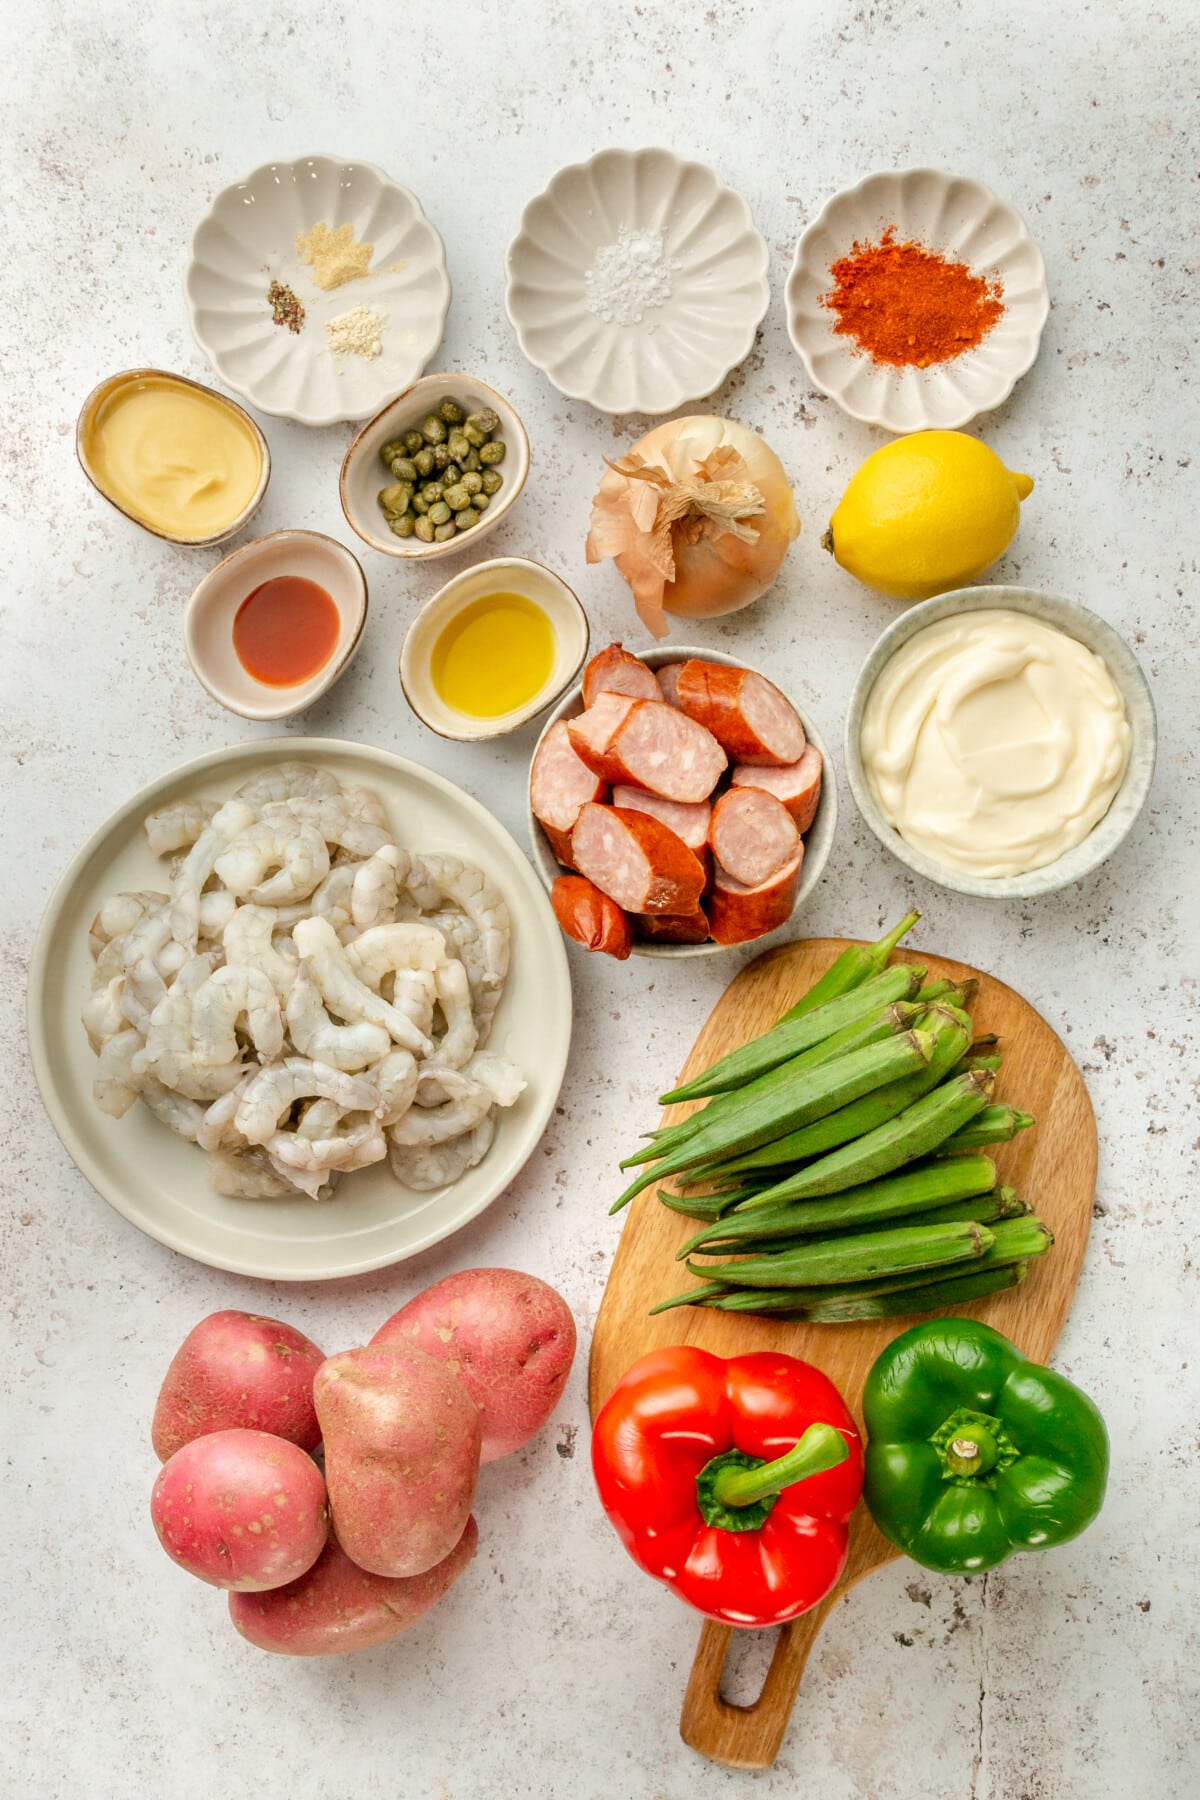 Ingredients for cajun shrimp sheet pan dinner sit in a variety of bowls and plates on a light grey surface.